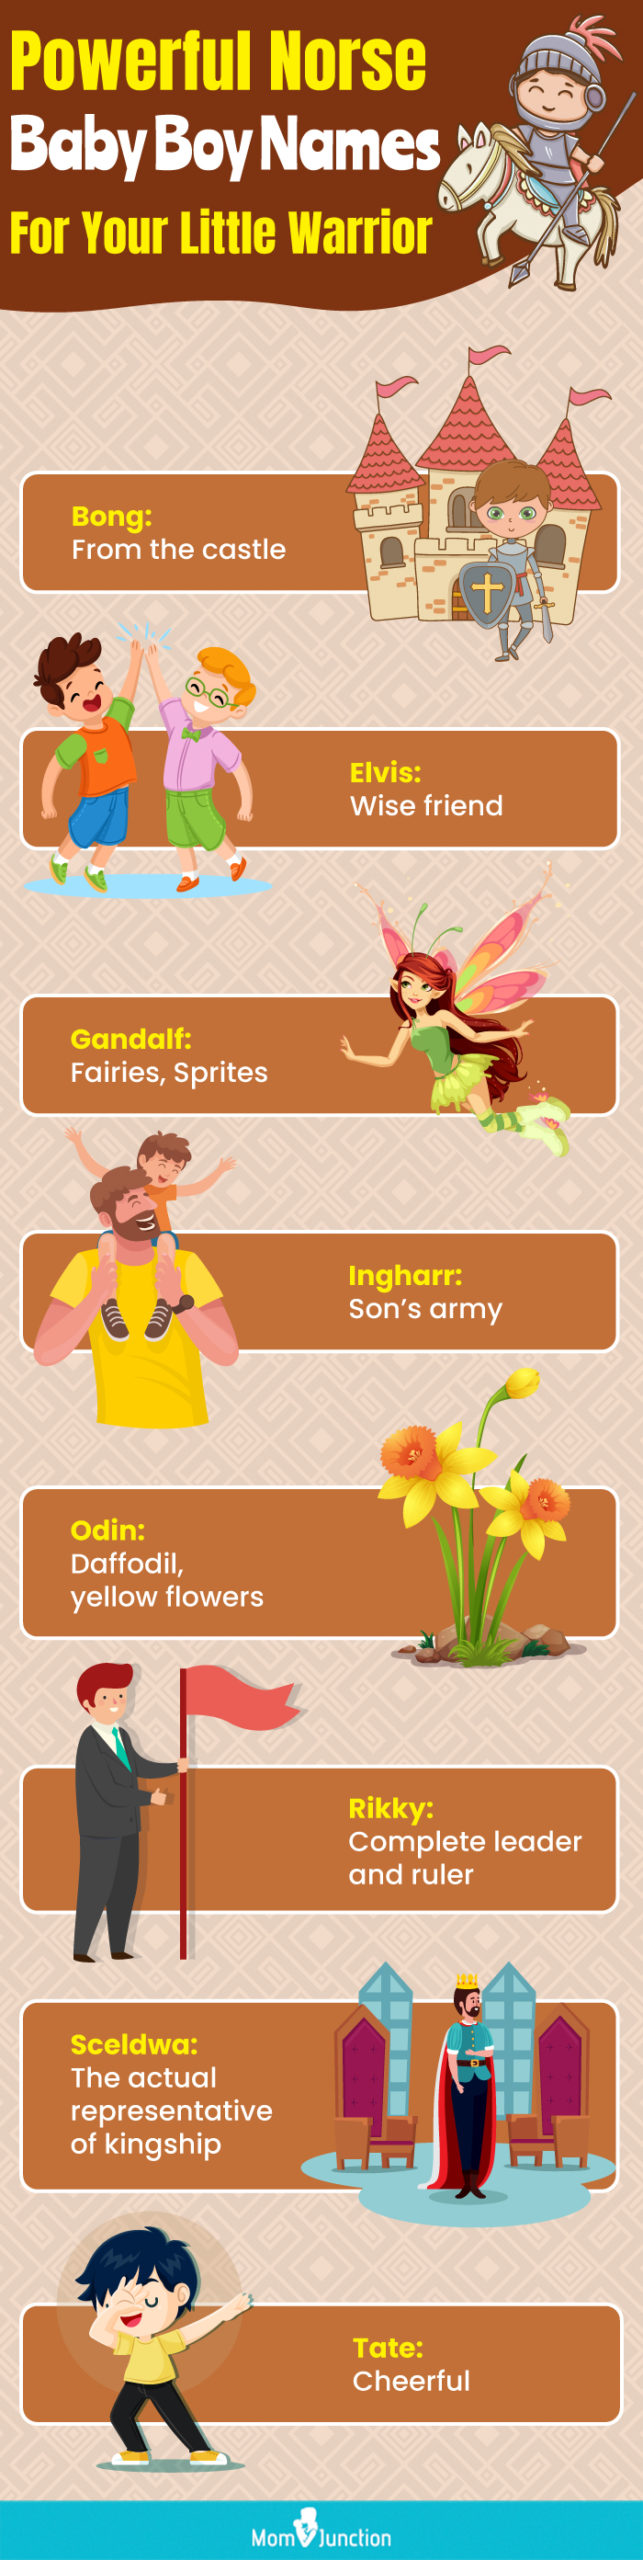 powerful norse baby boy names for your little warrior (infographic)